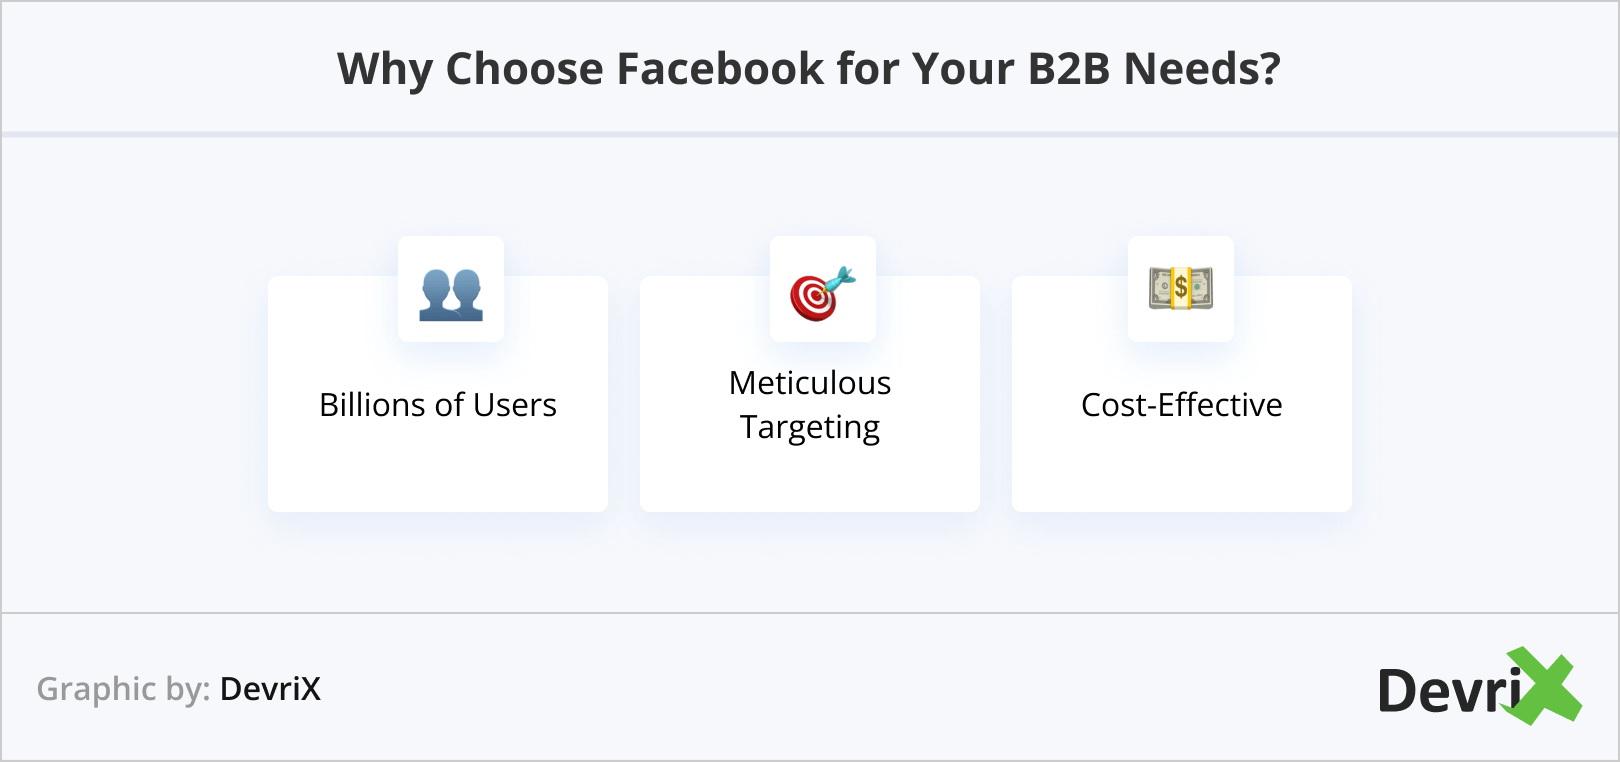 Why Choose Facebook for Your B2B Needs